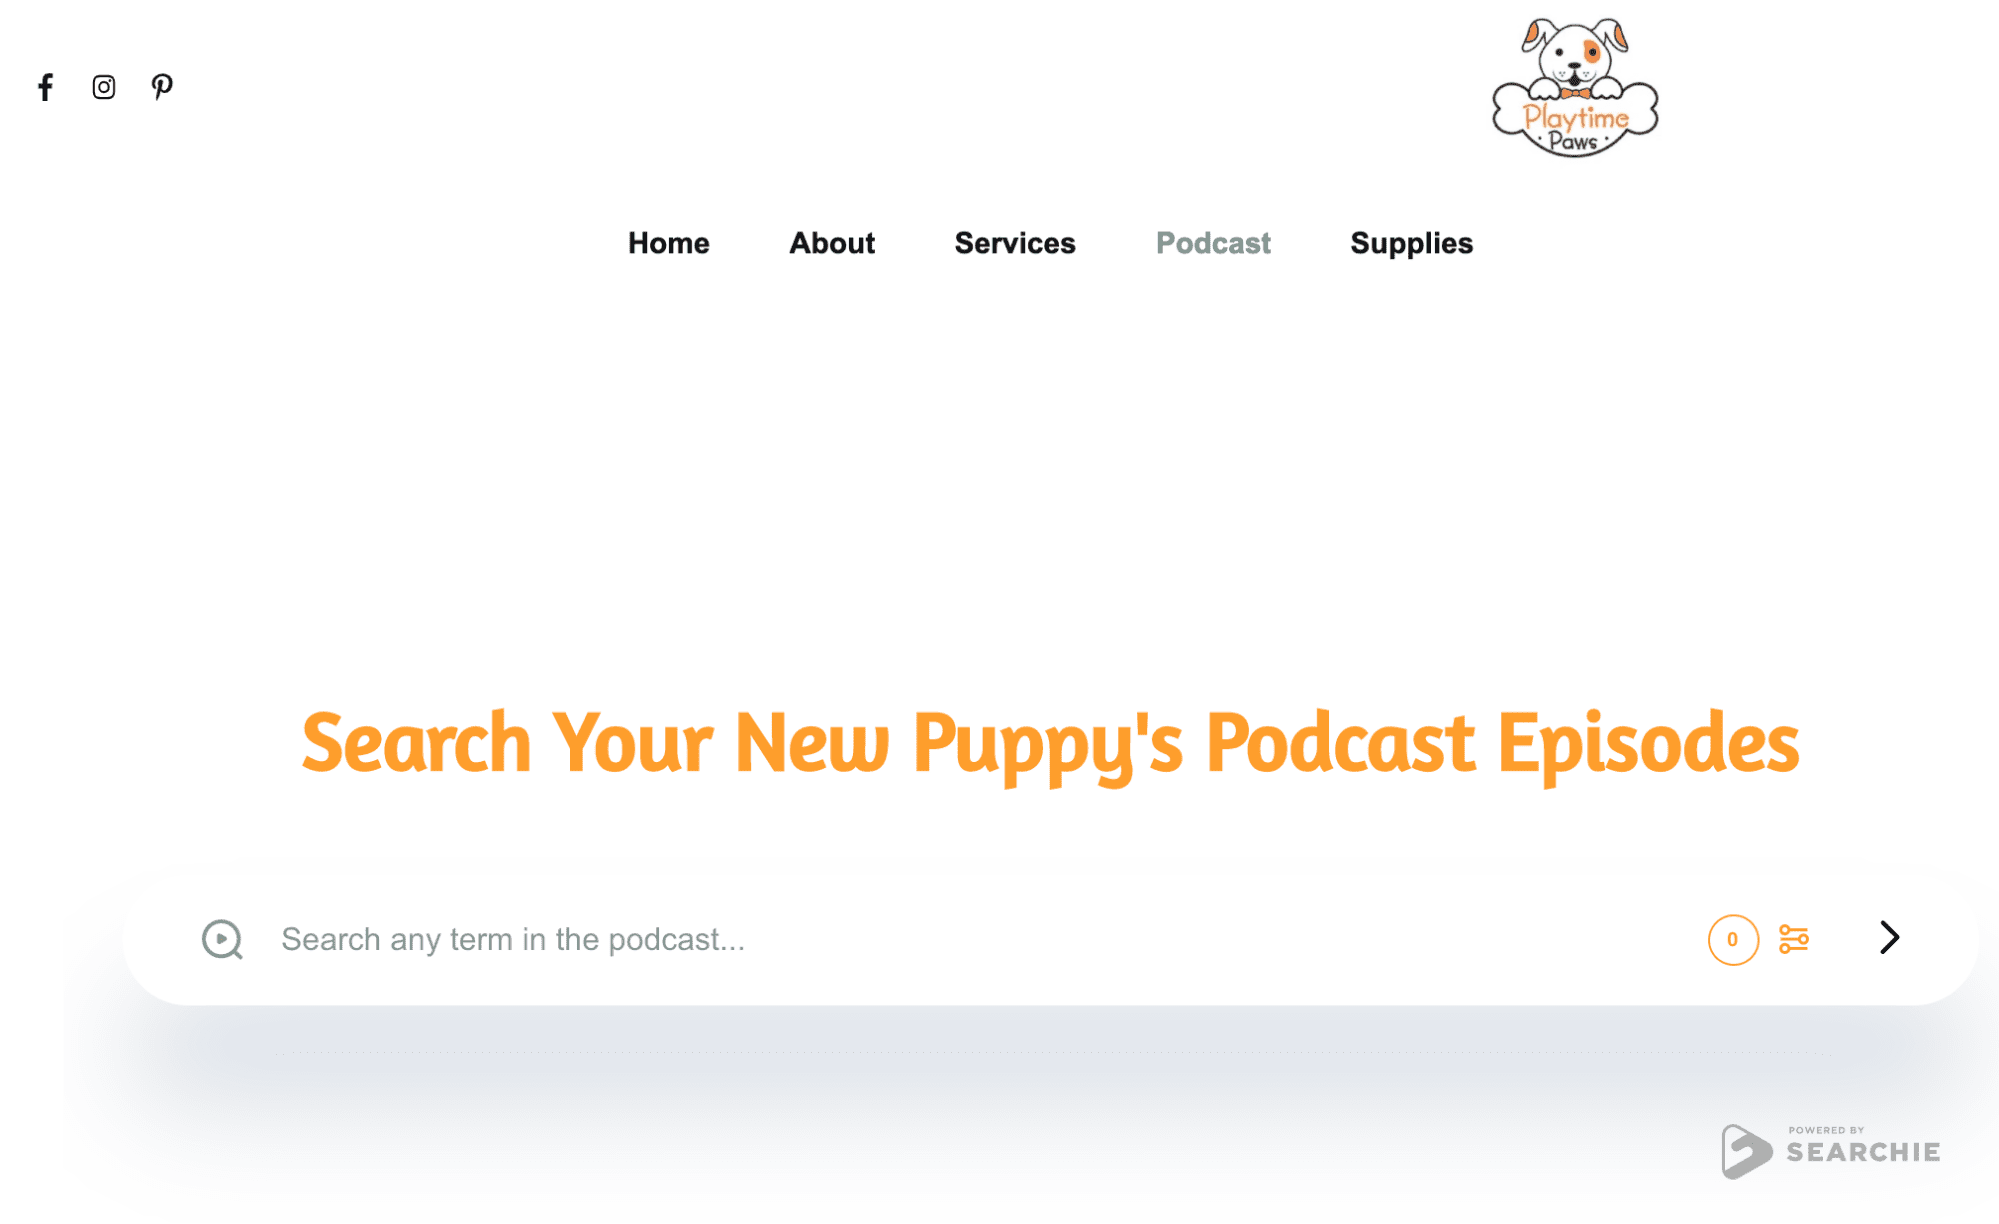 Your New Puppy Podcast